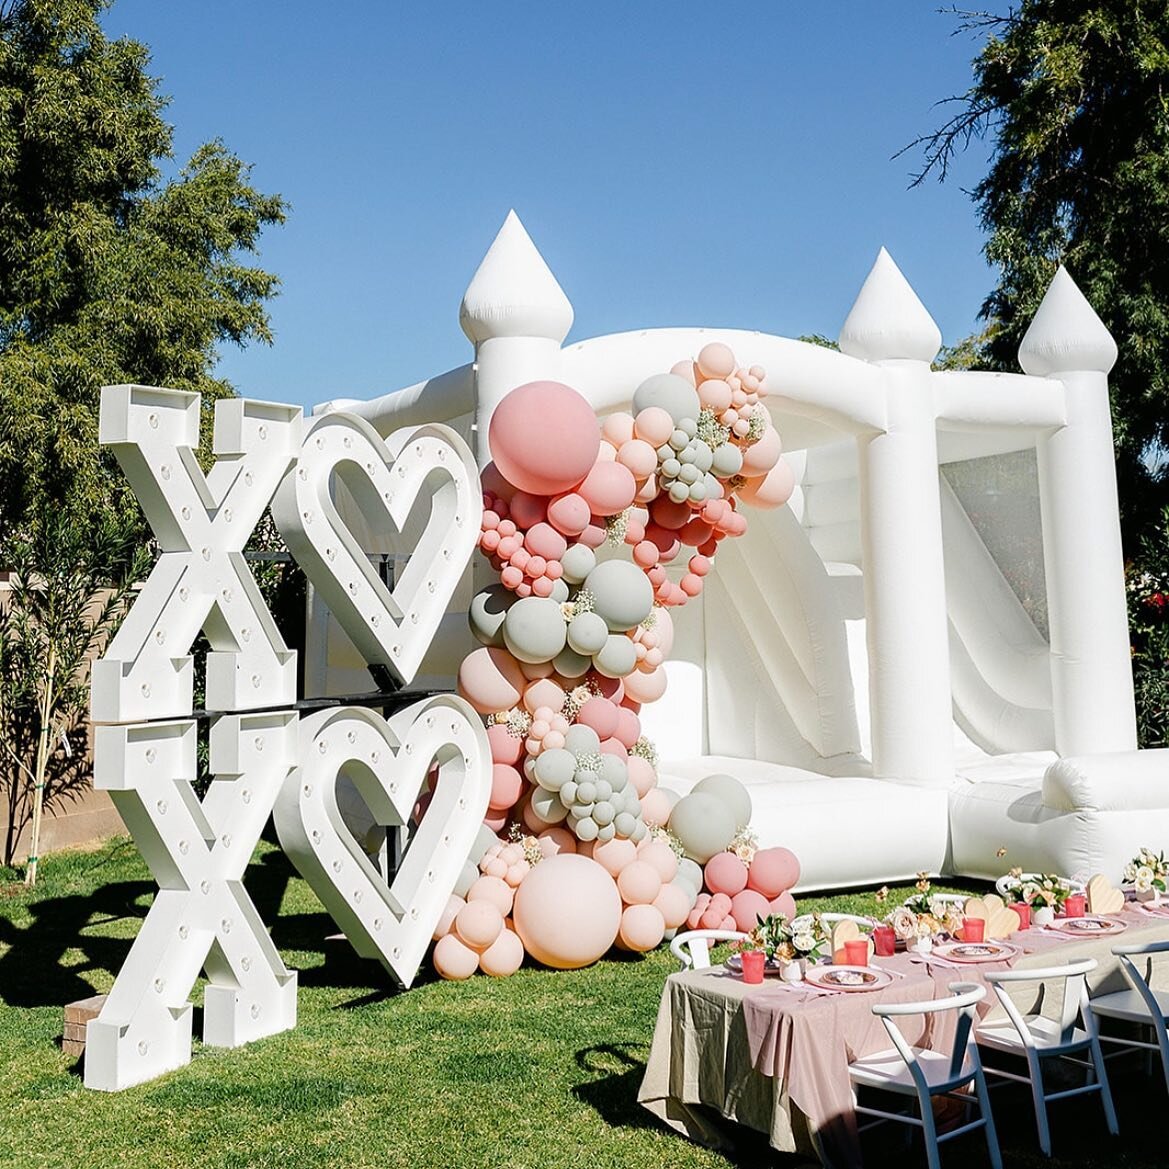 Our most popular rental, the Boujee Combo, all dressed up. 💕

Host &amp; Photographer: @thelaurenstyle
Design &amp; Balloons: @createandinflateeevents
Bounce House: @inflatefortyeight
Marquee Letters: @desertsageaz
Lounge and Table Setting: @letsbas